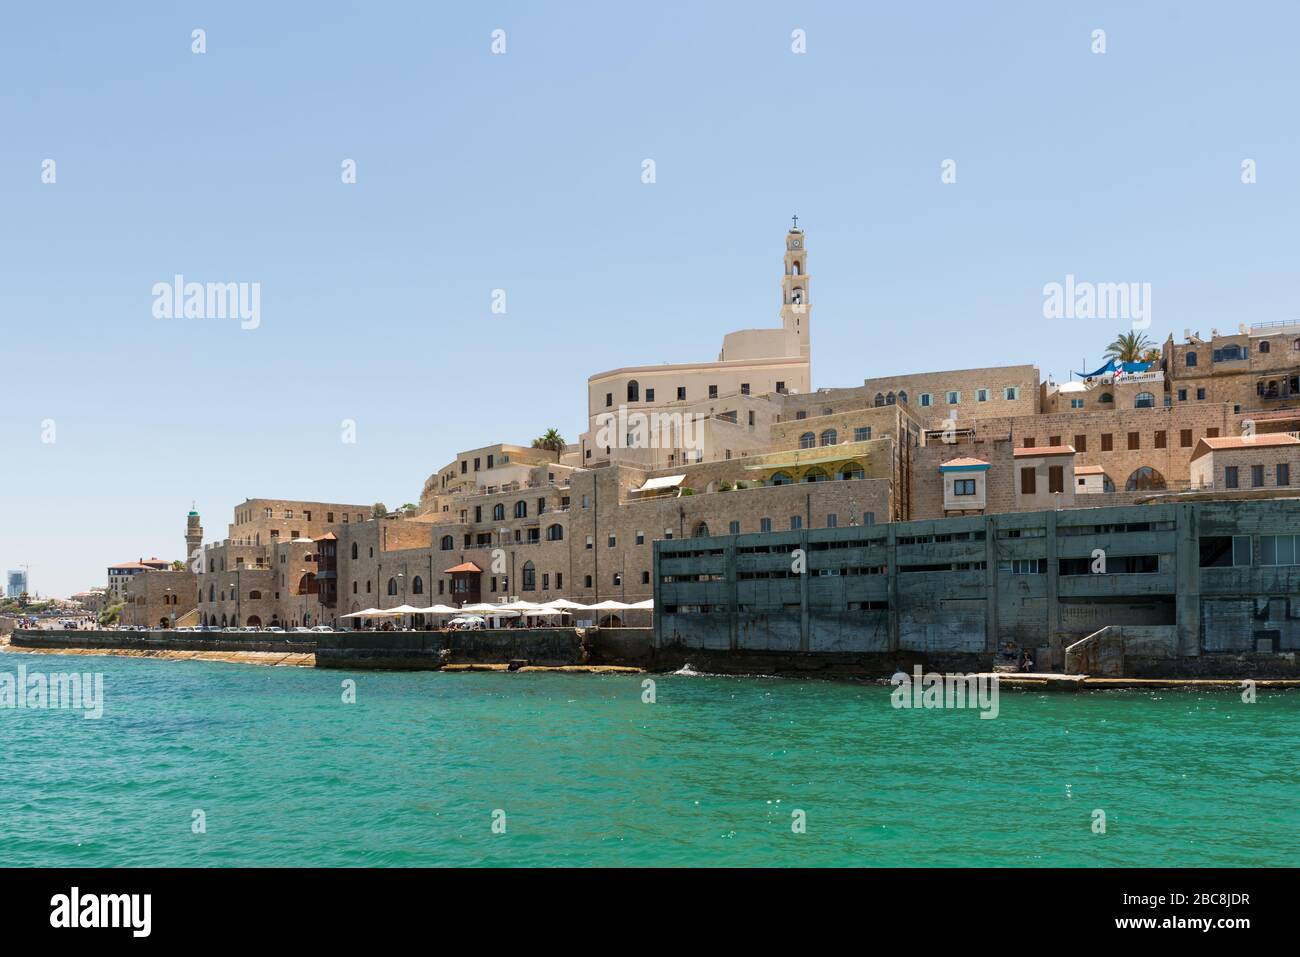 Jaffa view from boat, Israel Stock Photo